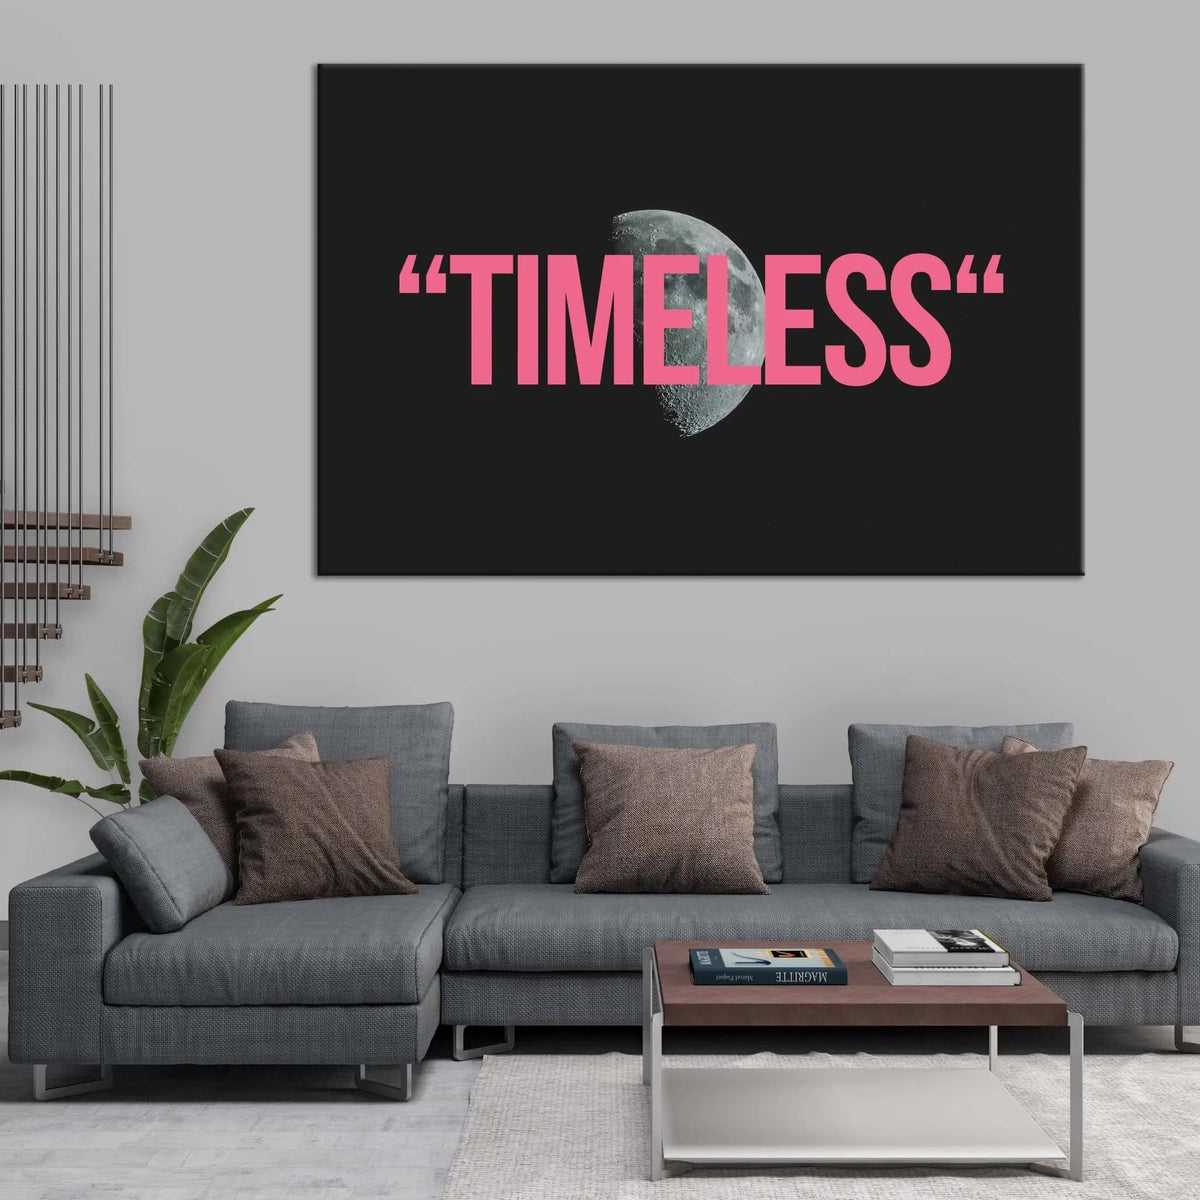 "TIMELESS" - Art For Everyone